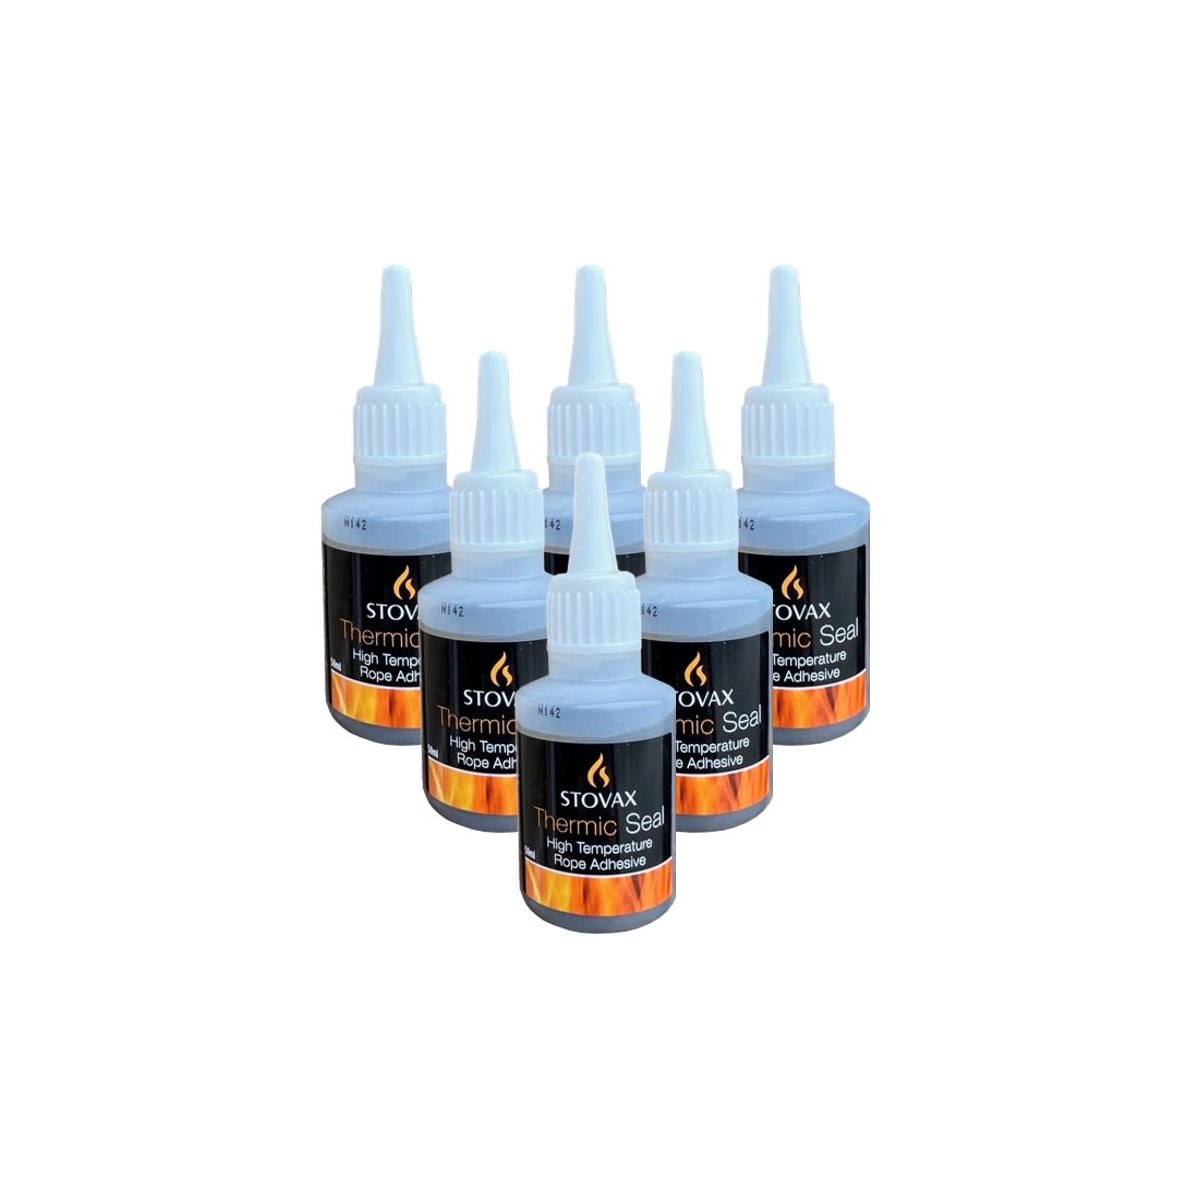 Case of 6 x Stovax Thermic Seal 50ml